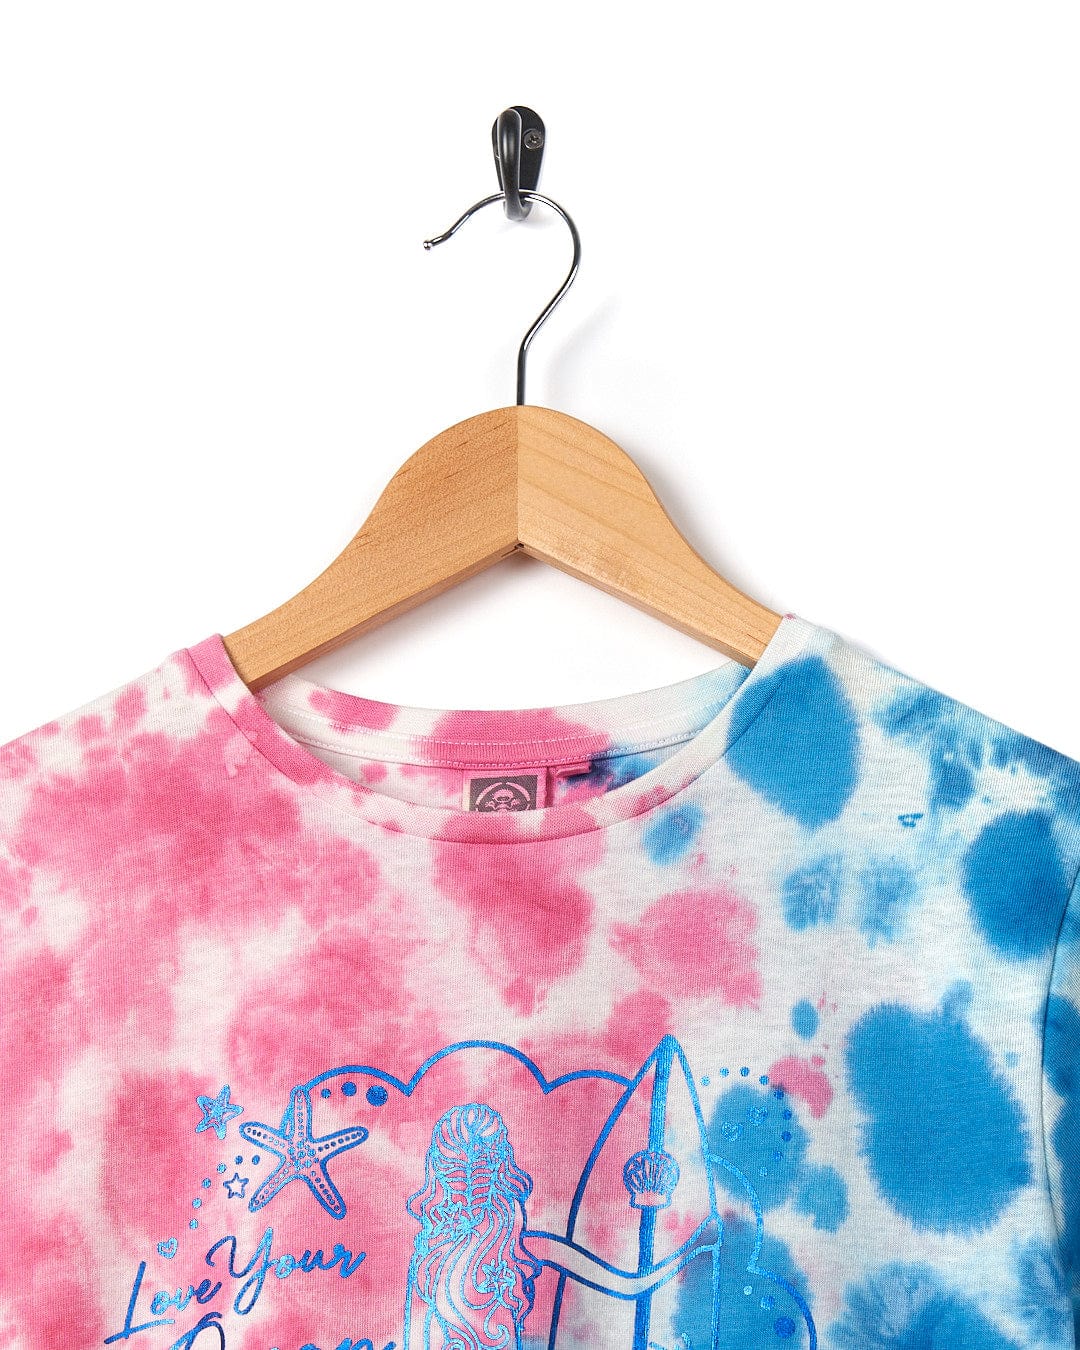 A Saltrock Mermaid Surf - Kids Tie Dye Short Sleeve T-Shirt - Blue/Pink, beach ready with a tie dye design and an image of a girl riding a surfboard.